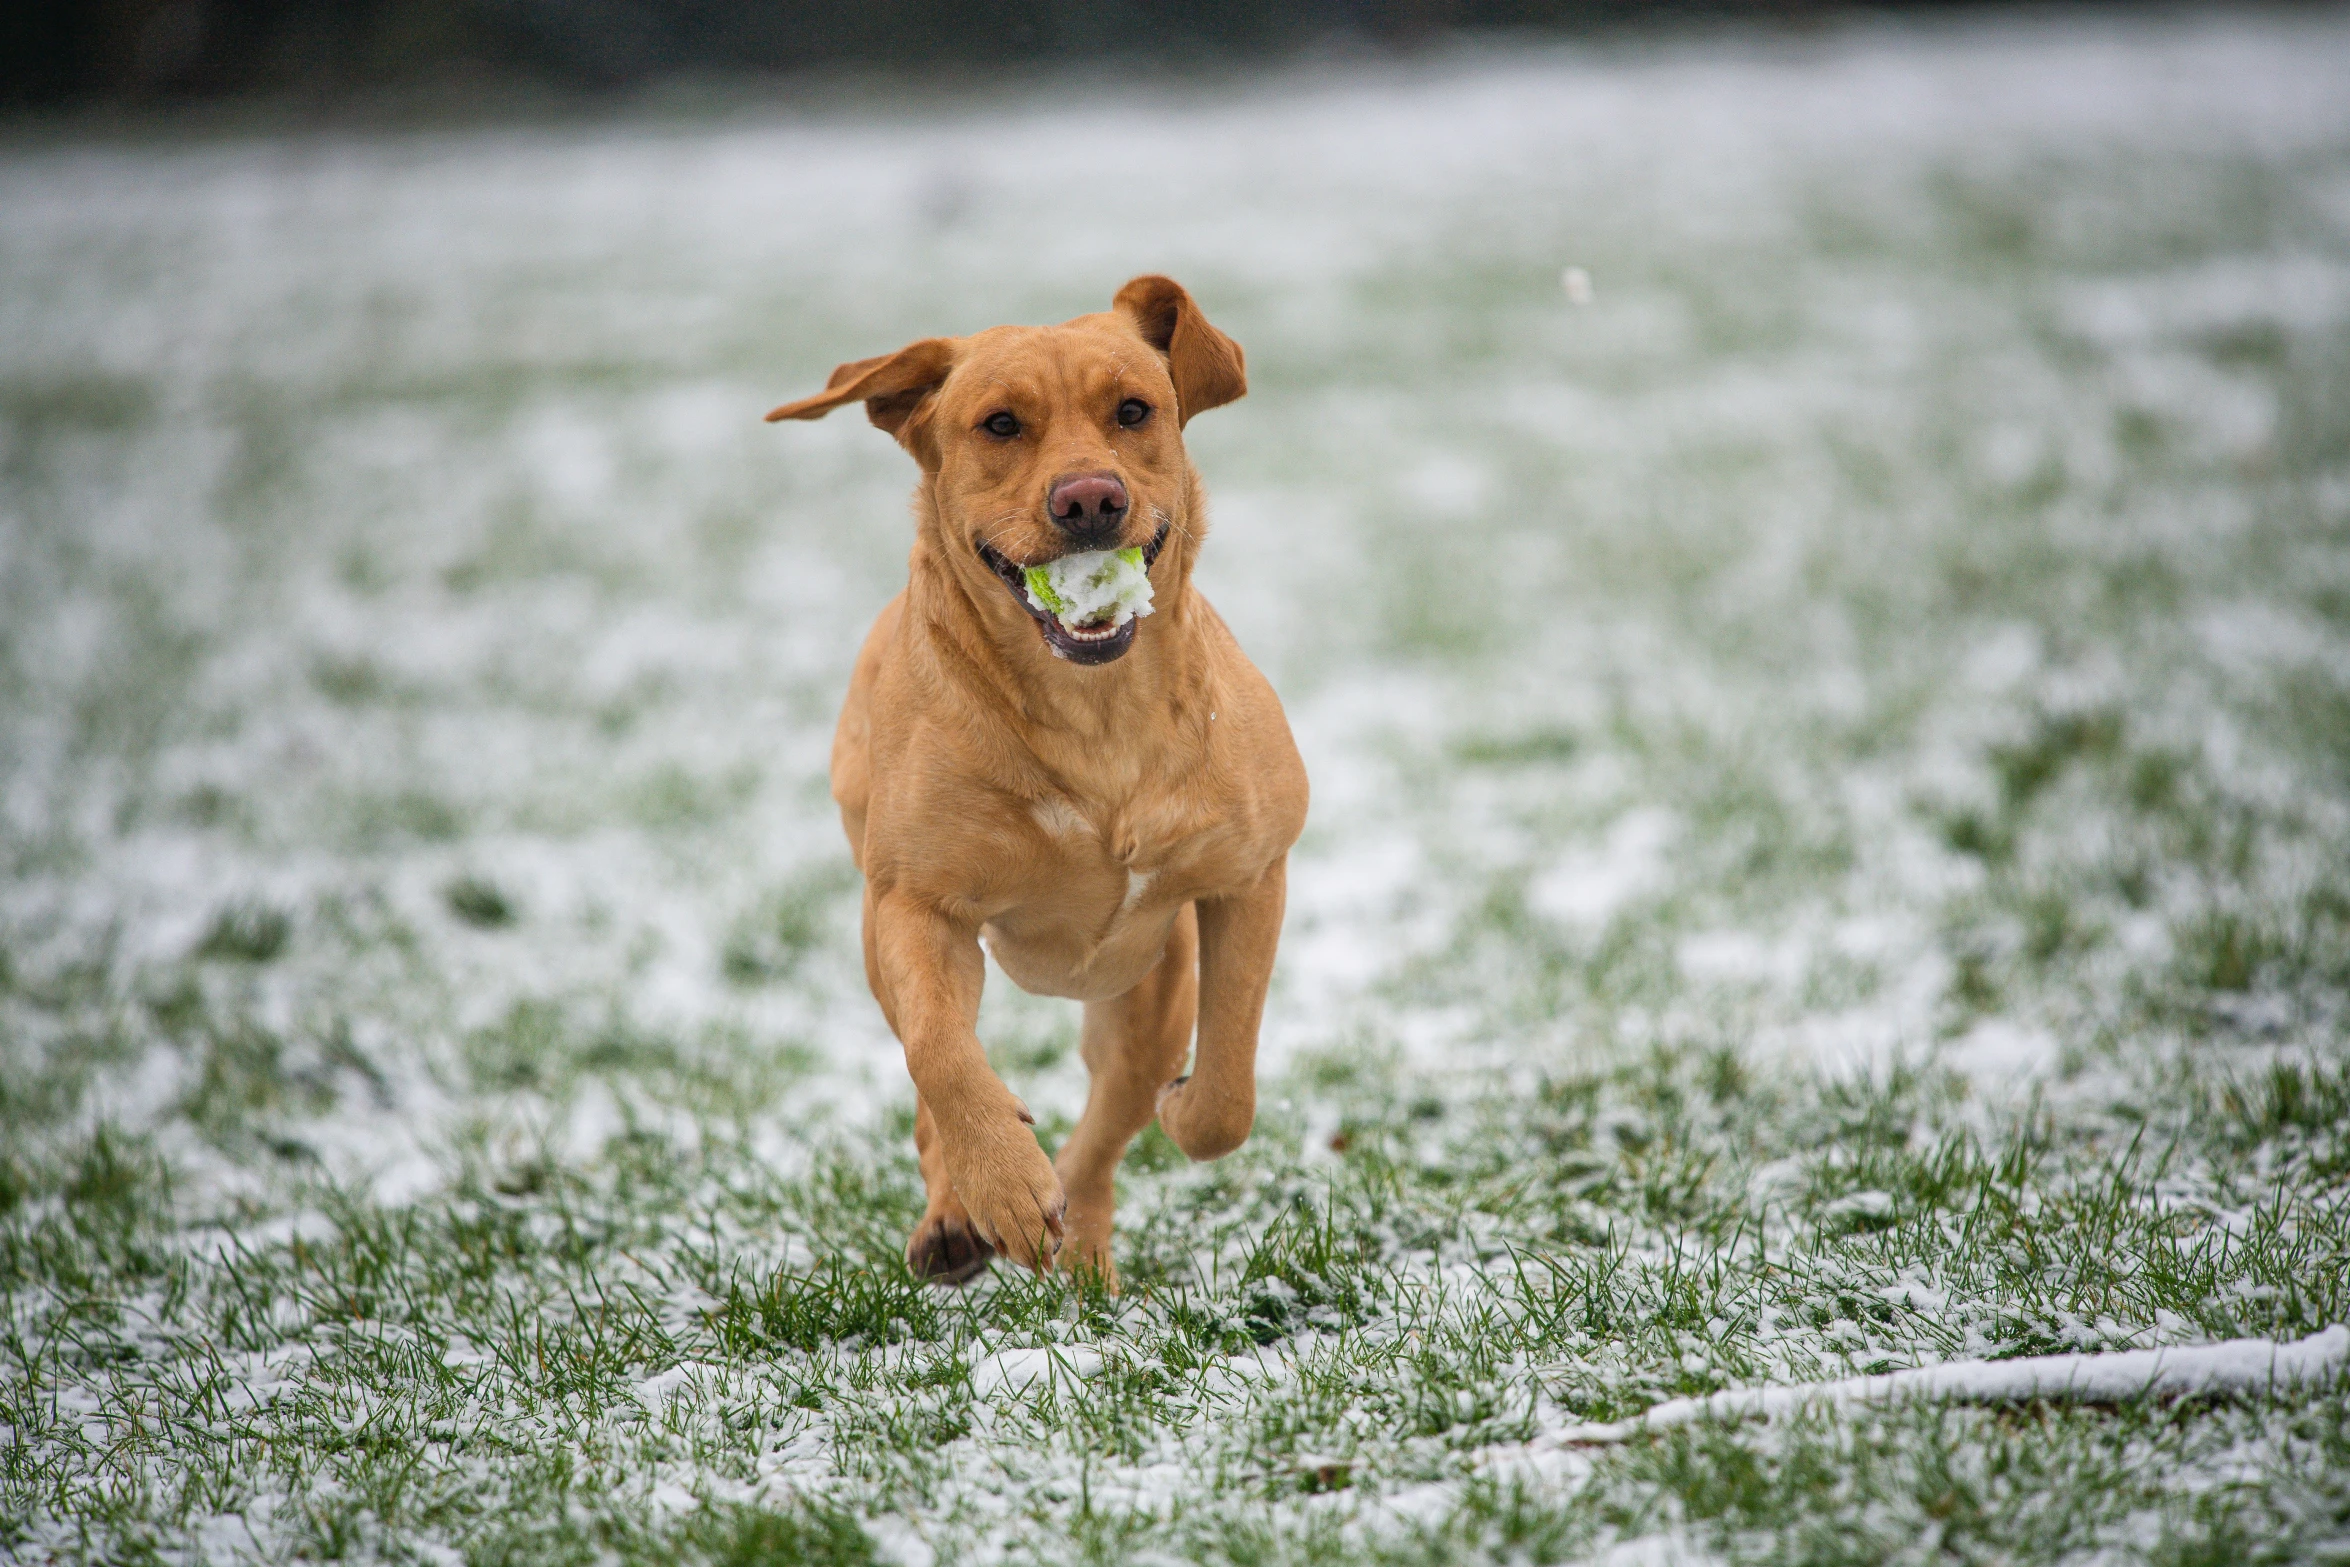 a dog running in the snow, holding a tennis ball in its mouth